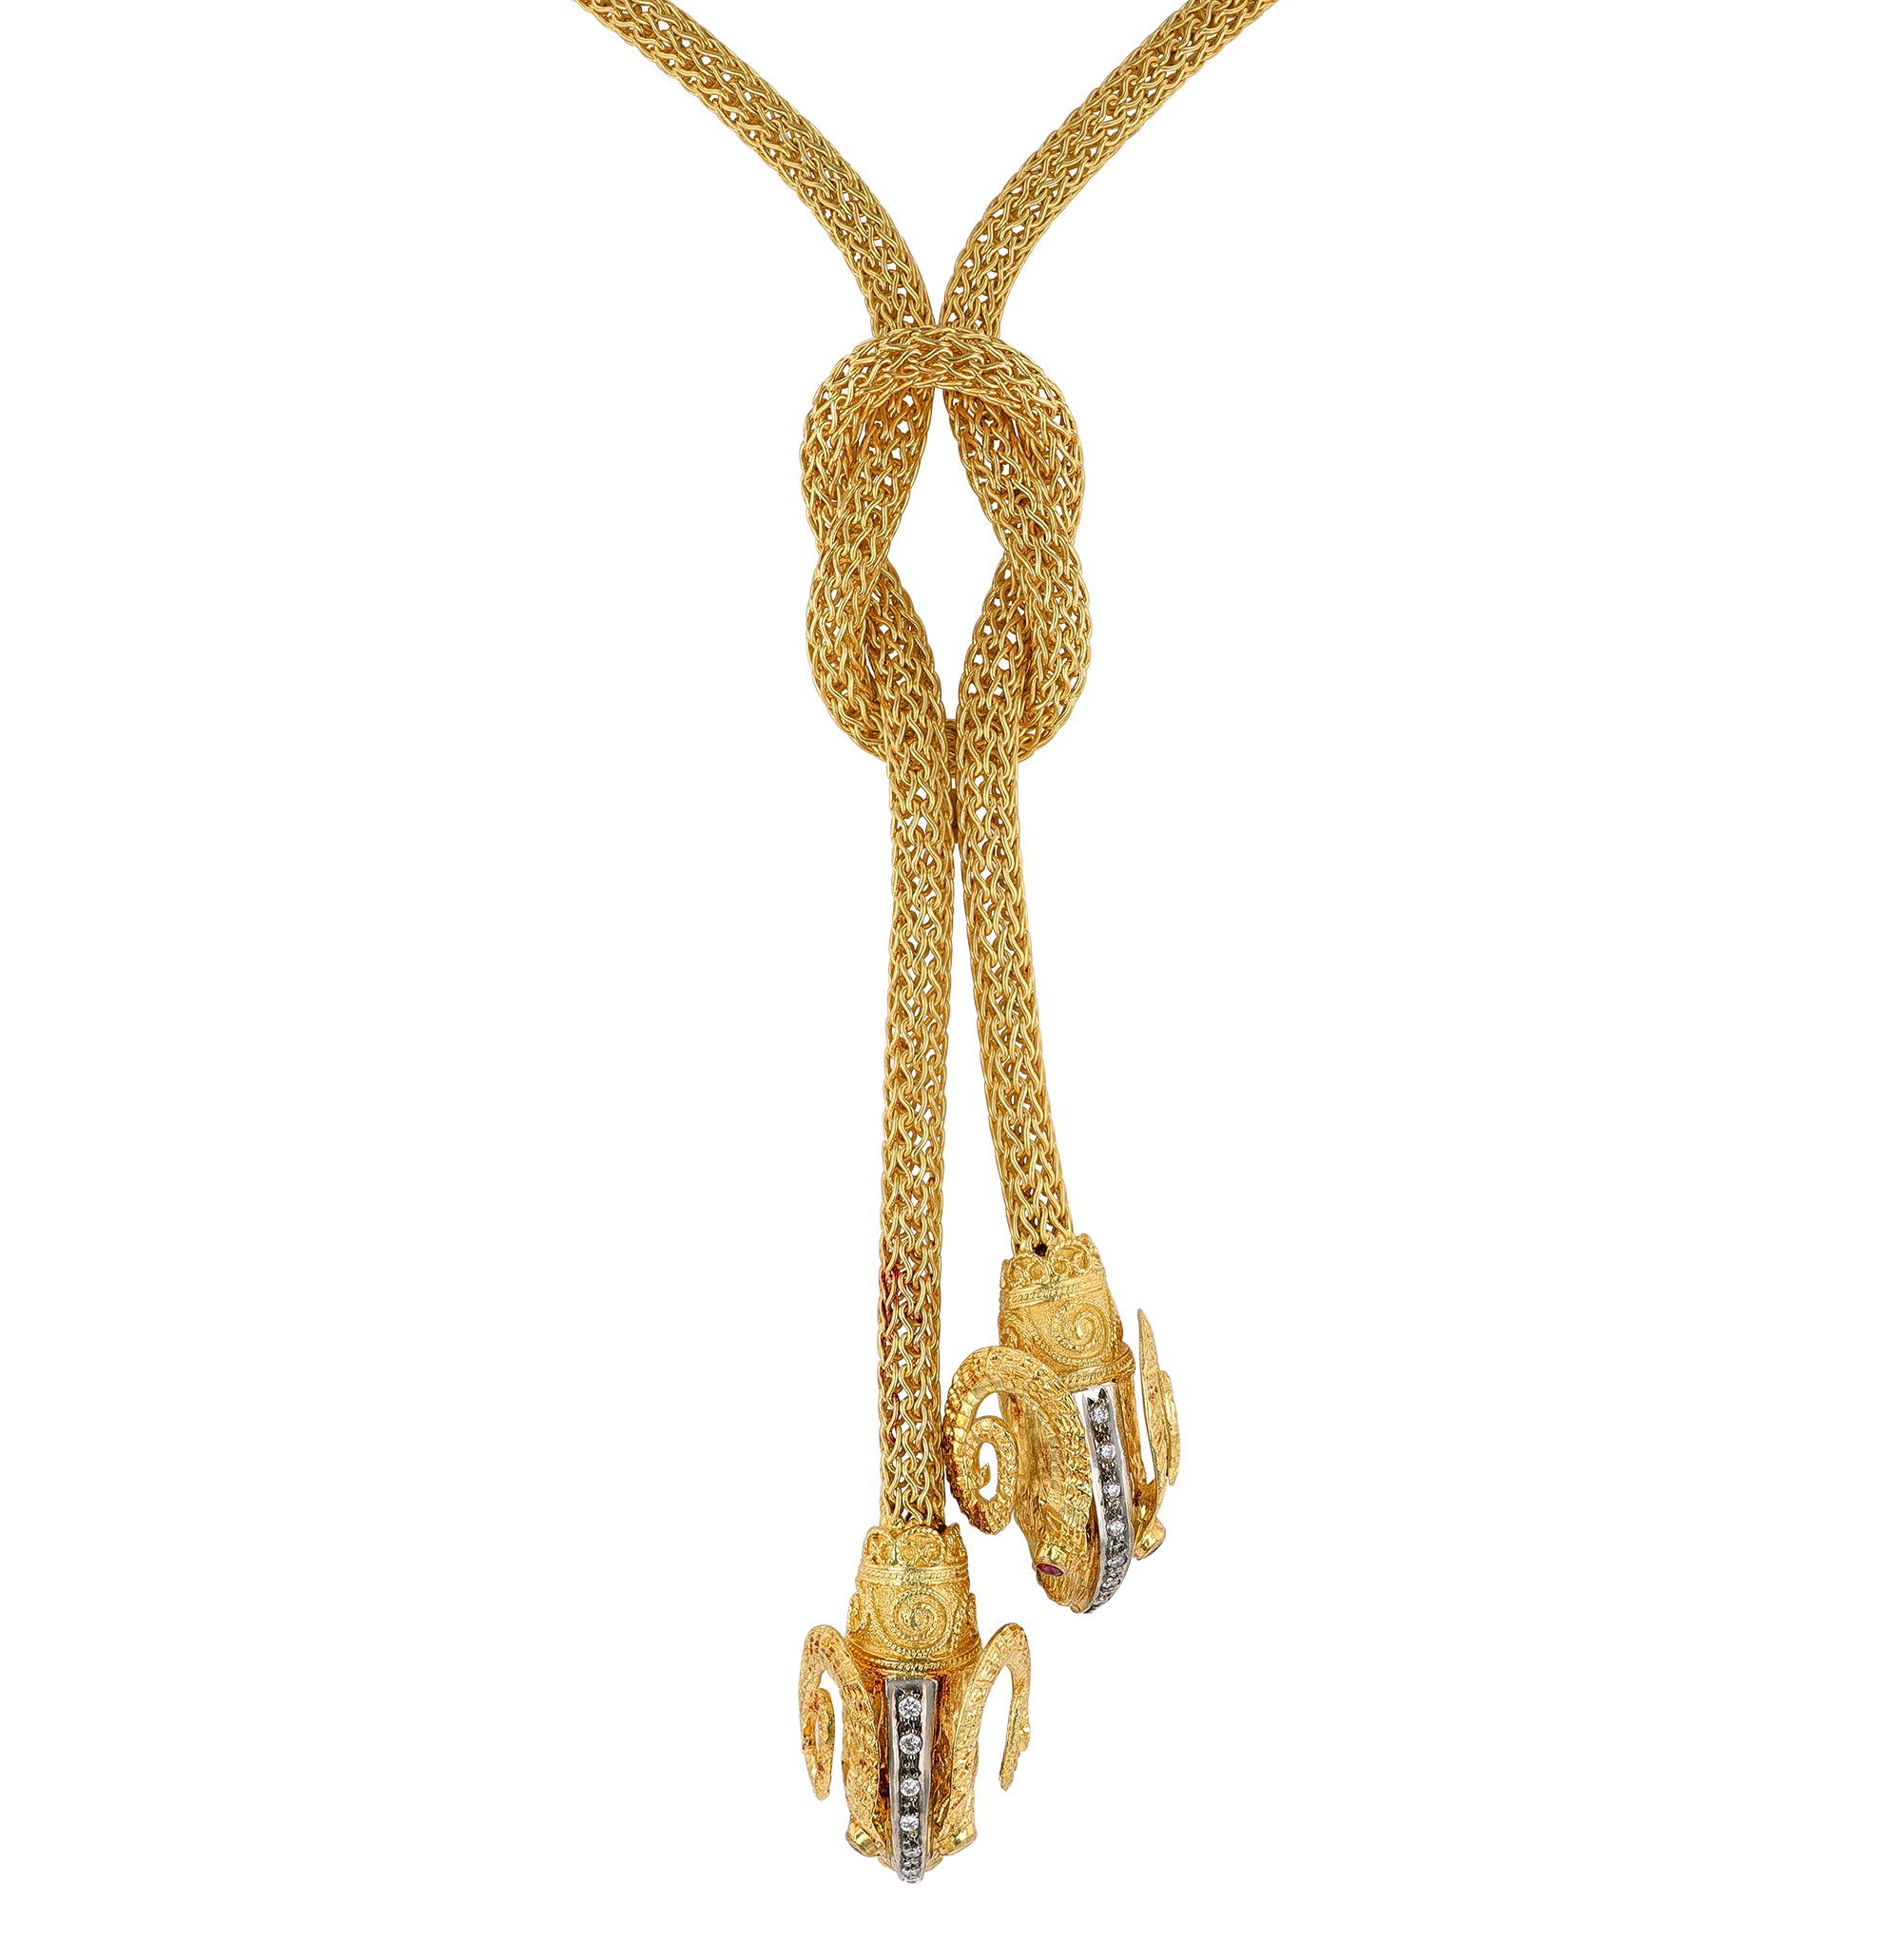 Gold and Diamond Rams Necklace